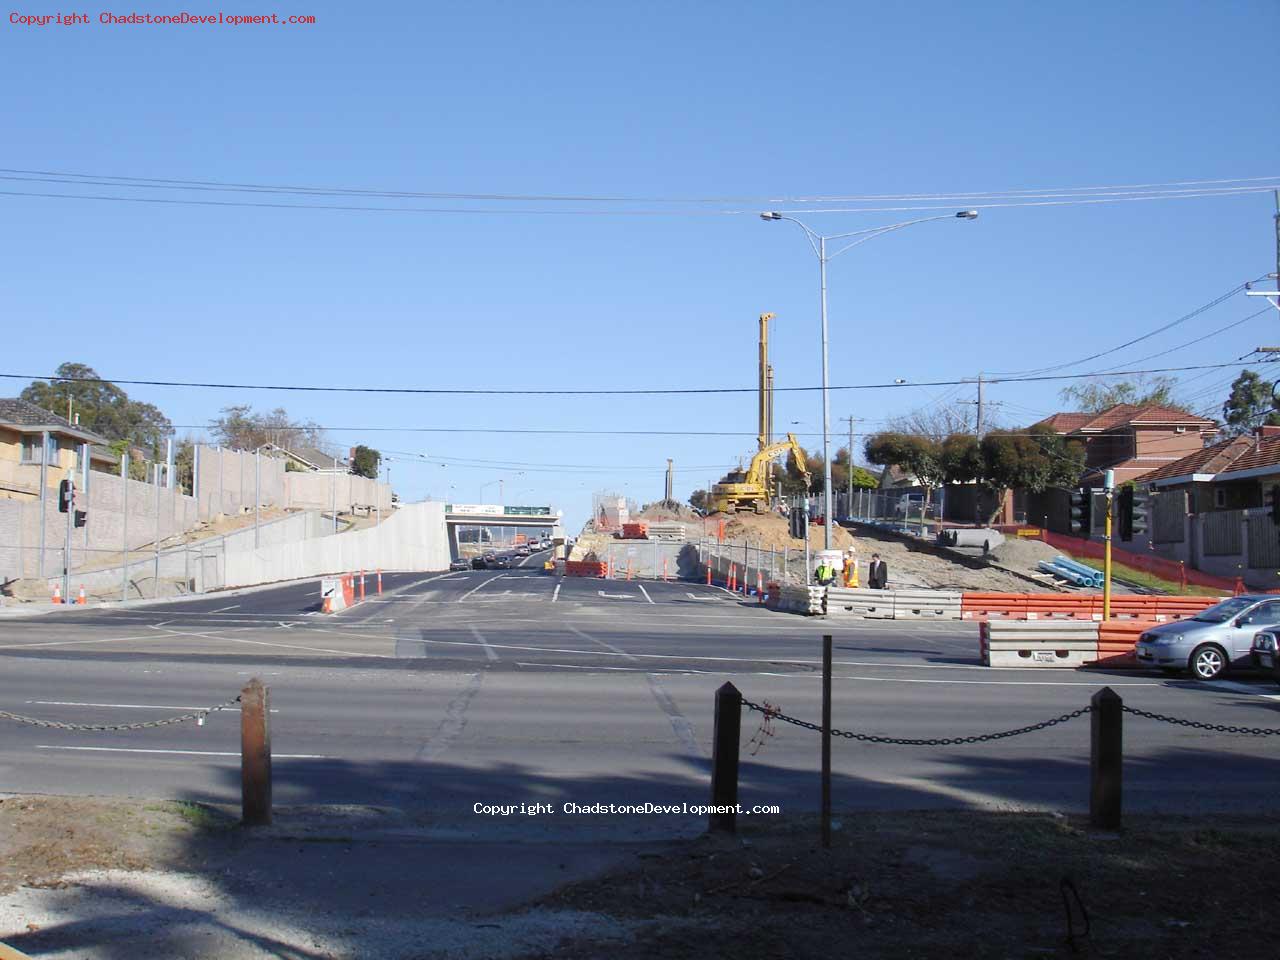 Looking down middle road, with the new turning lanes - Chadstone Development Discussions Gallery